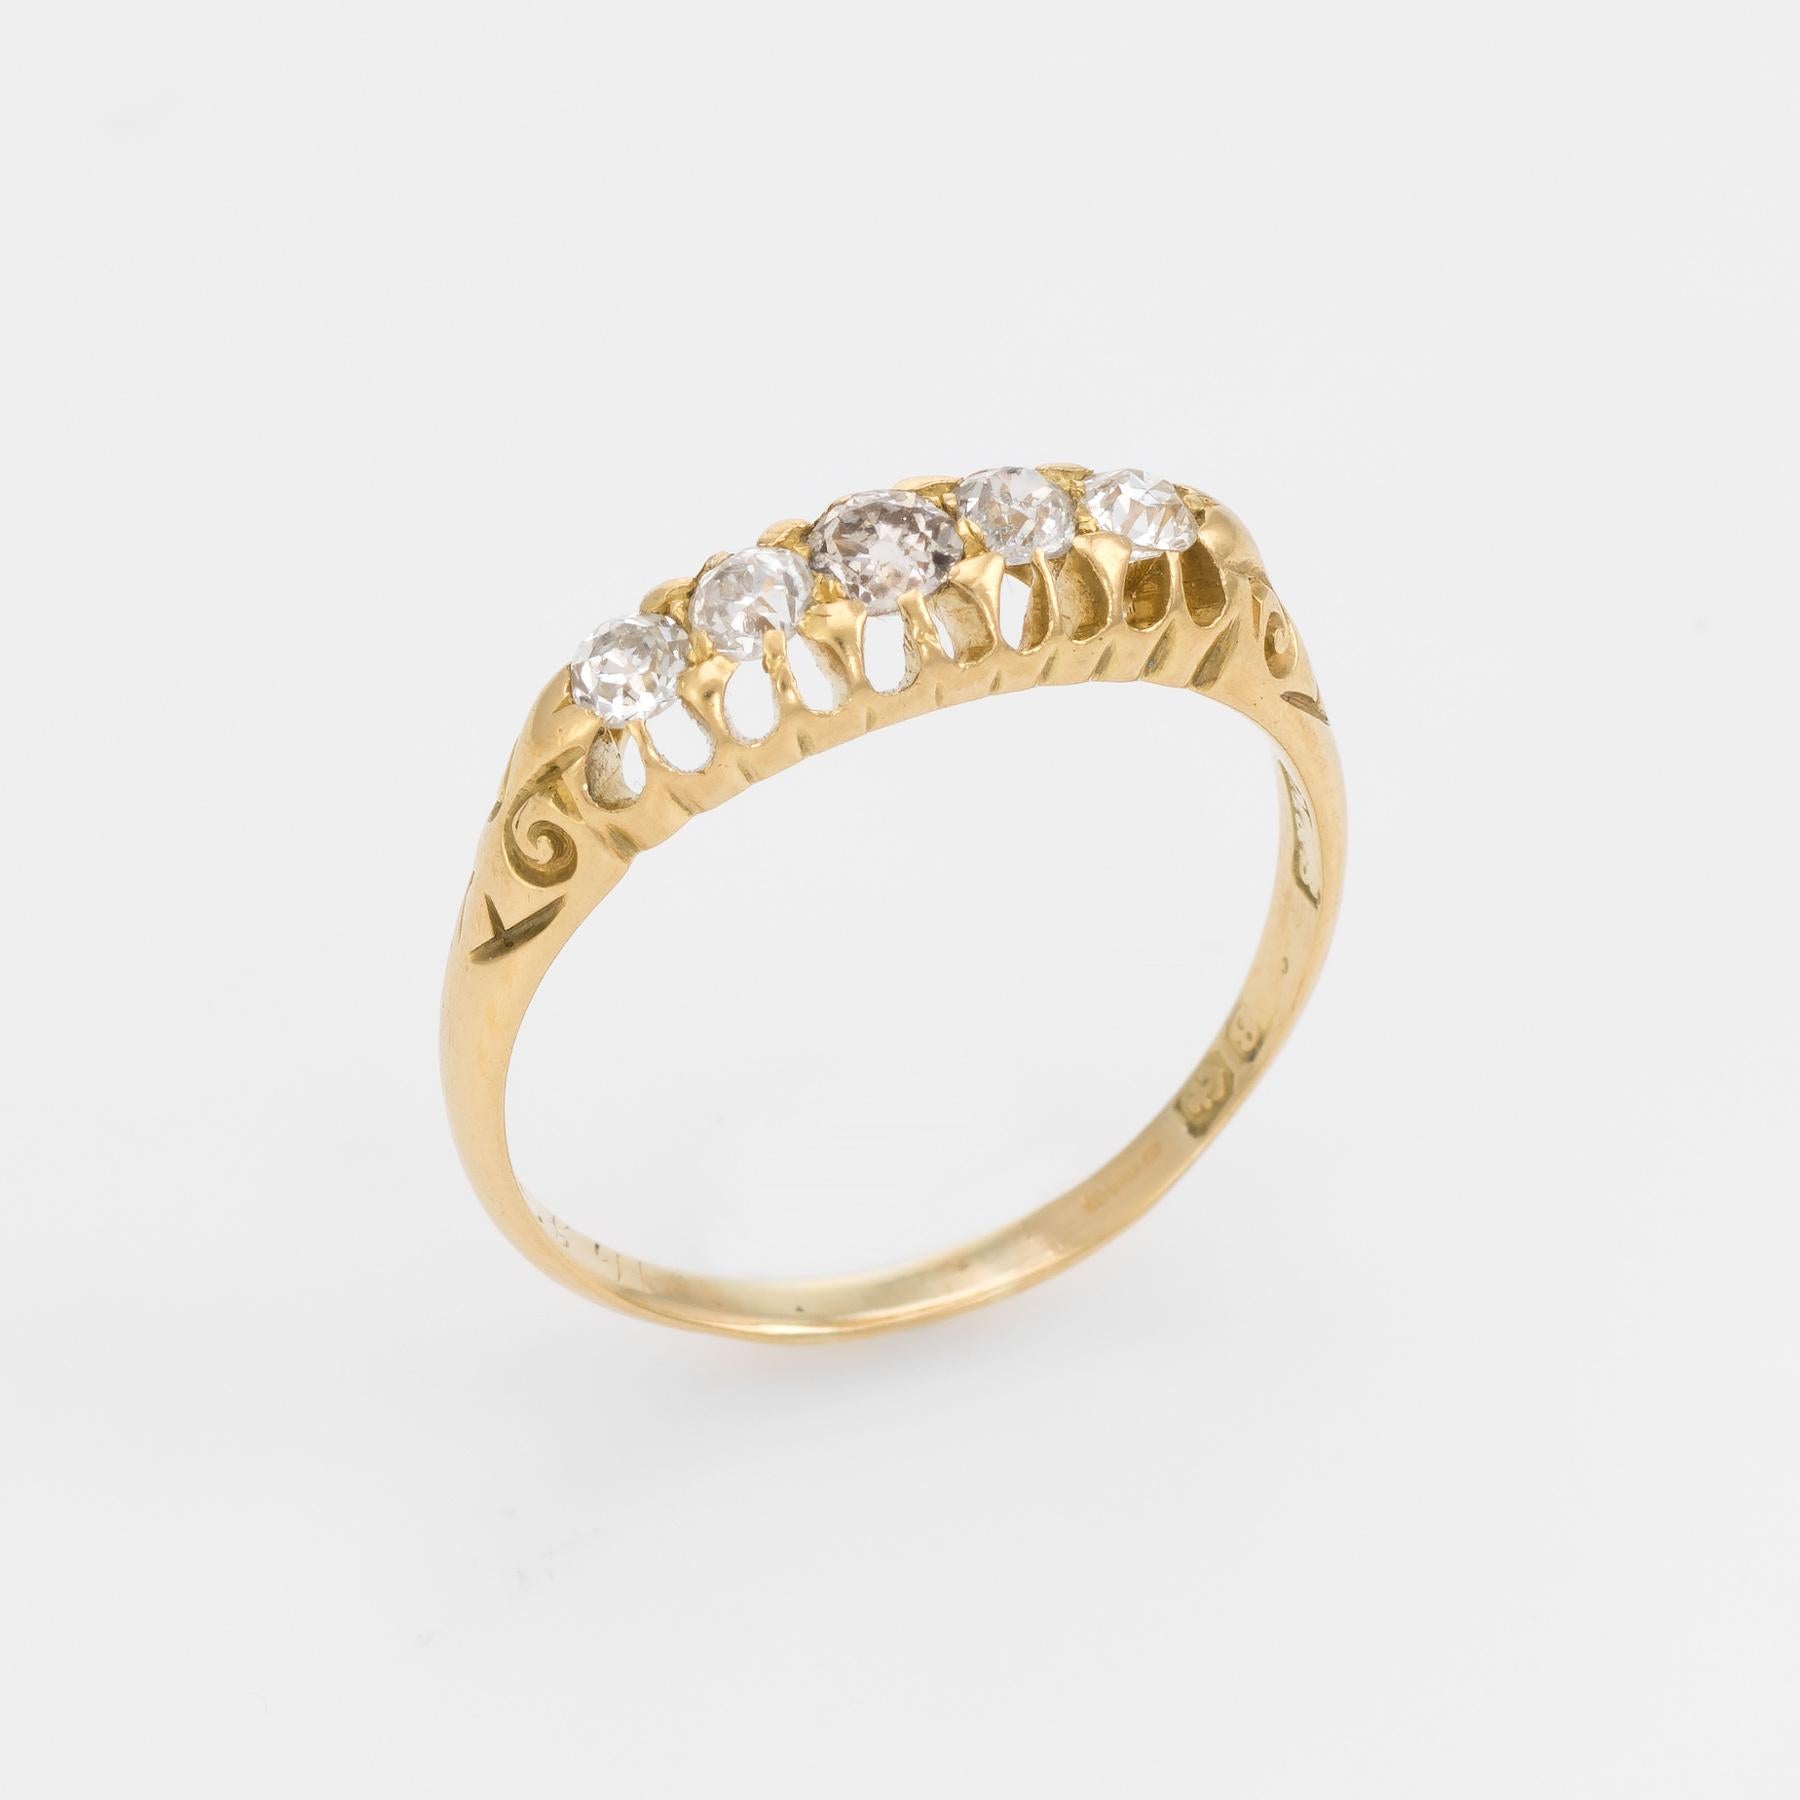 Finely detailed antique Edwardian era ring set with 5 graduated old mine cut diamonds (circa 1907), crafted in 18 karat yellow gold. 

The old mine cut diamonds graduate in size from the center (estimated at 0.20 carats) to the sides graduating from